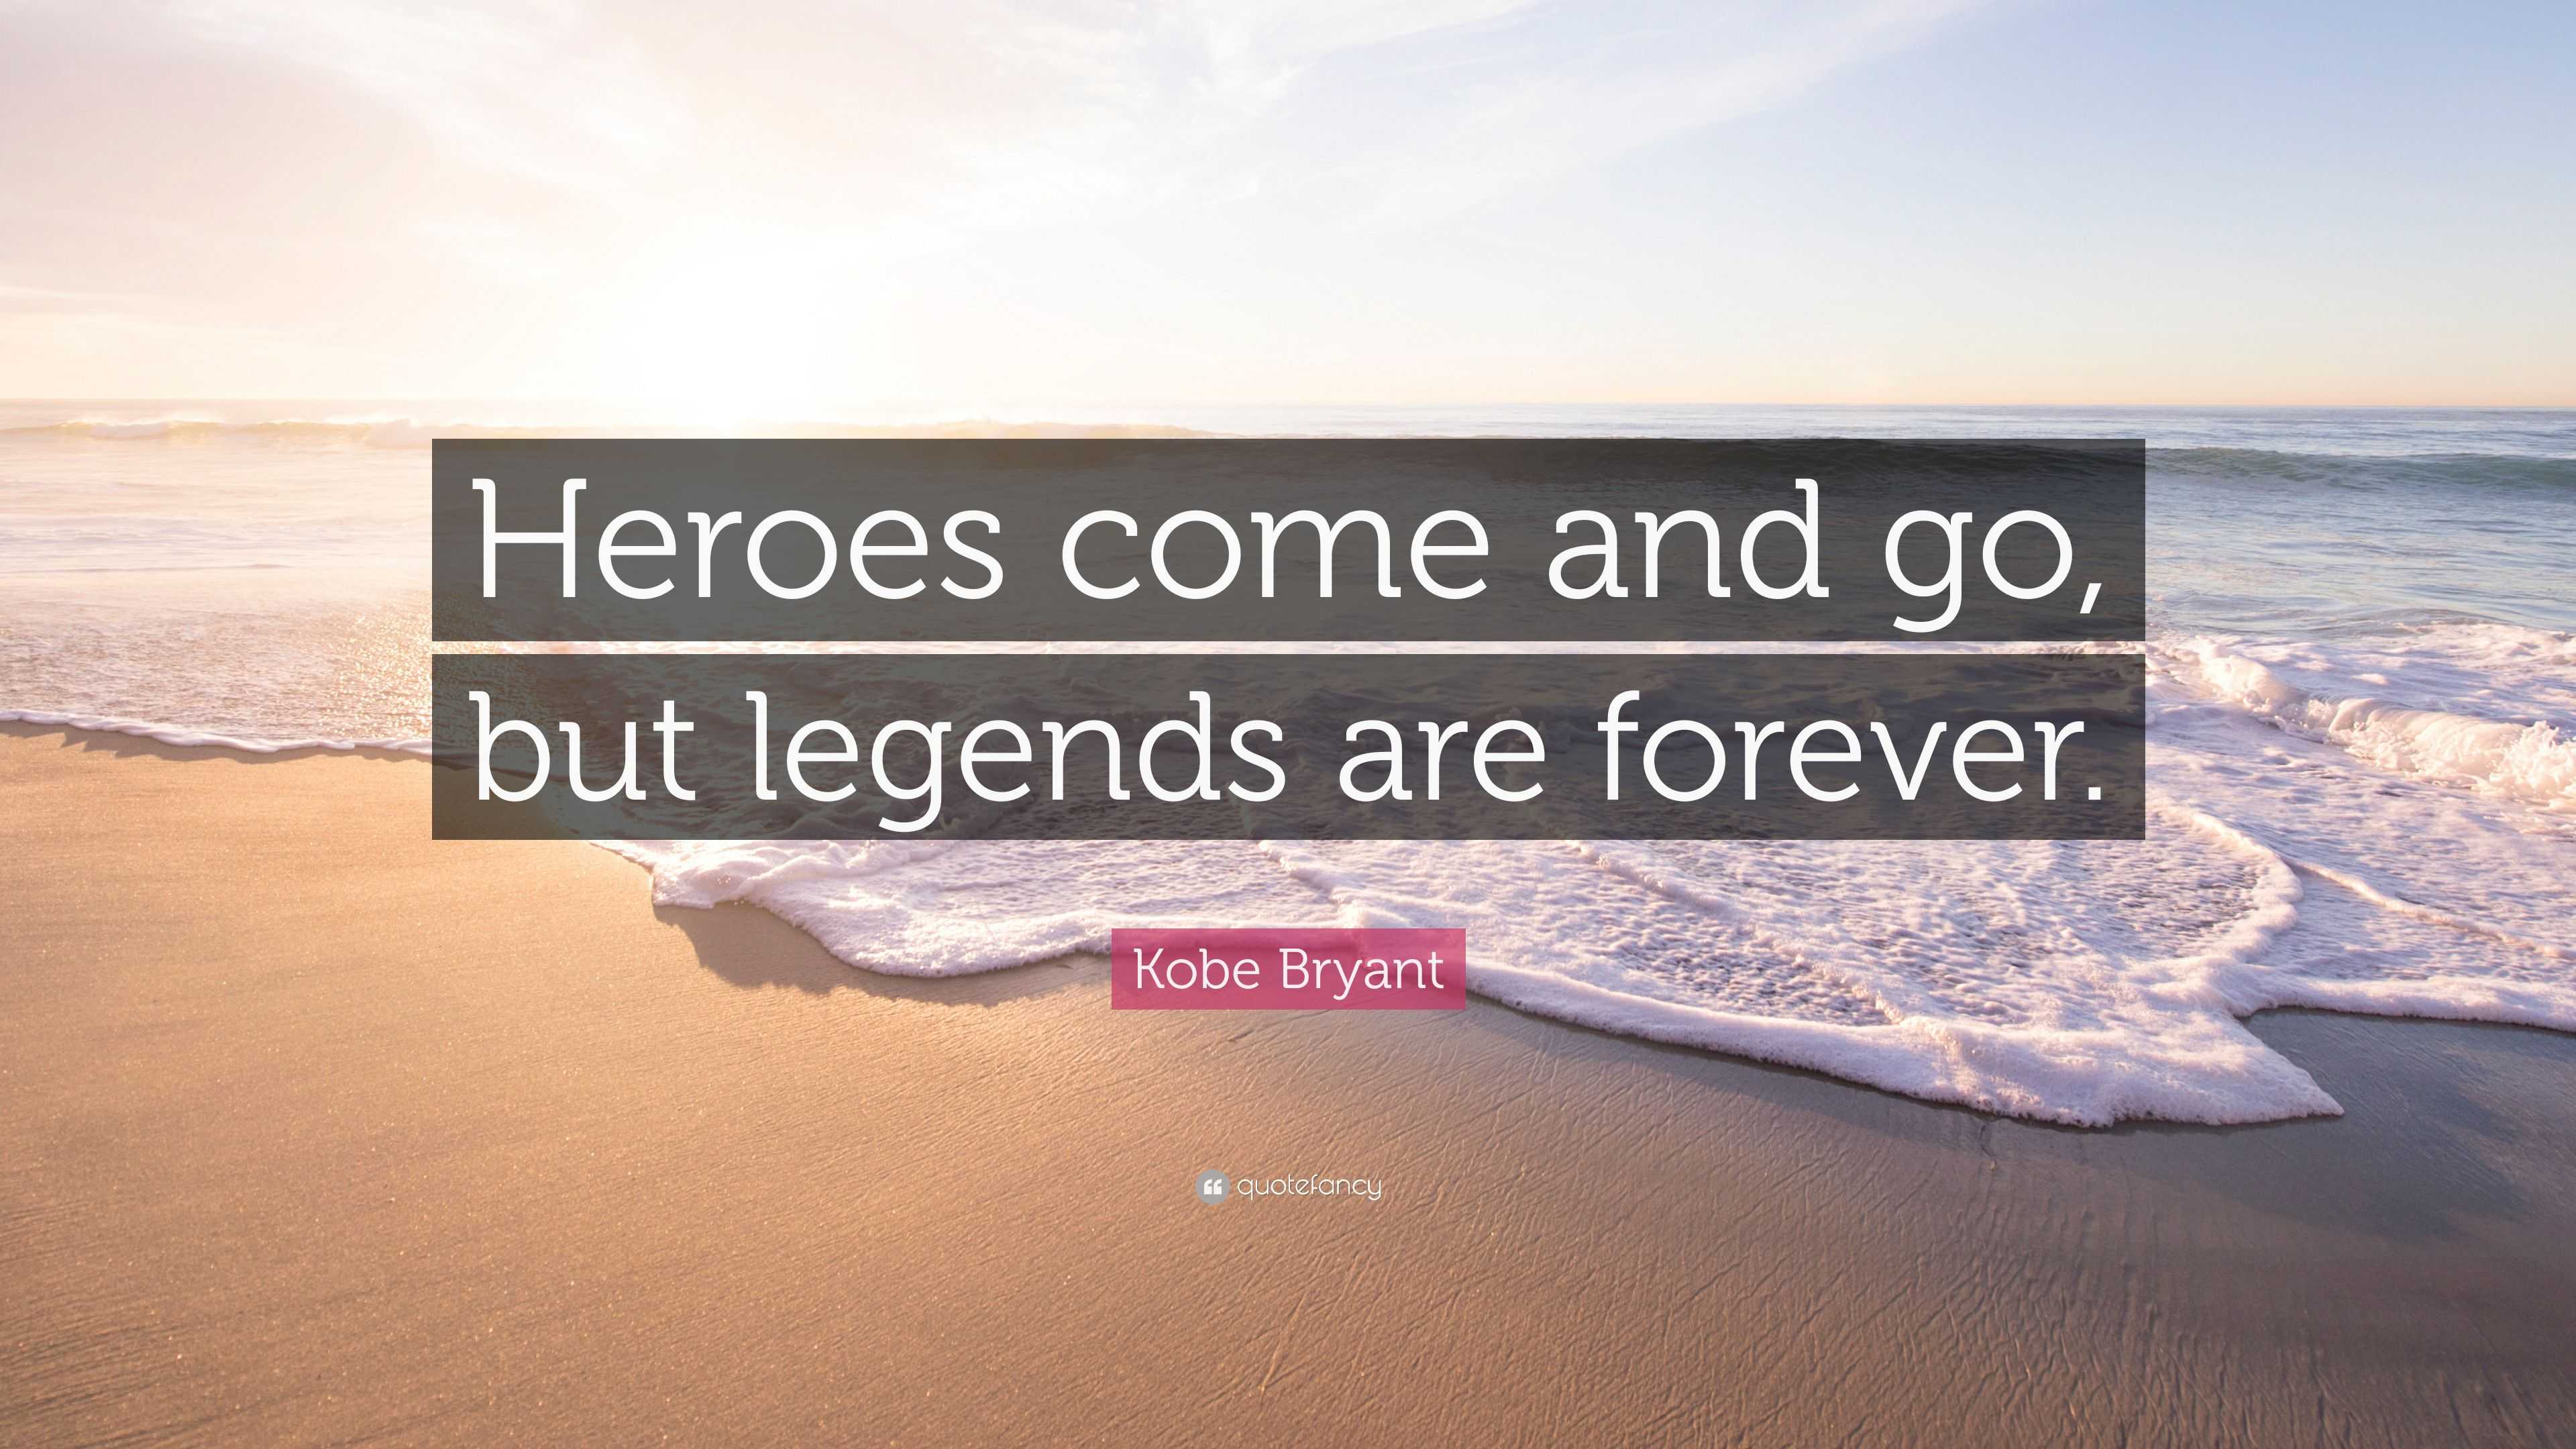 Heroes come and go, but legends live forever. Quickmart wishes to